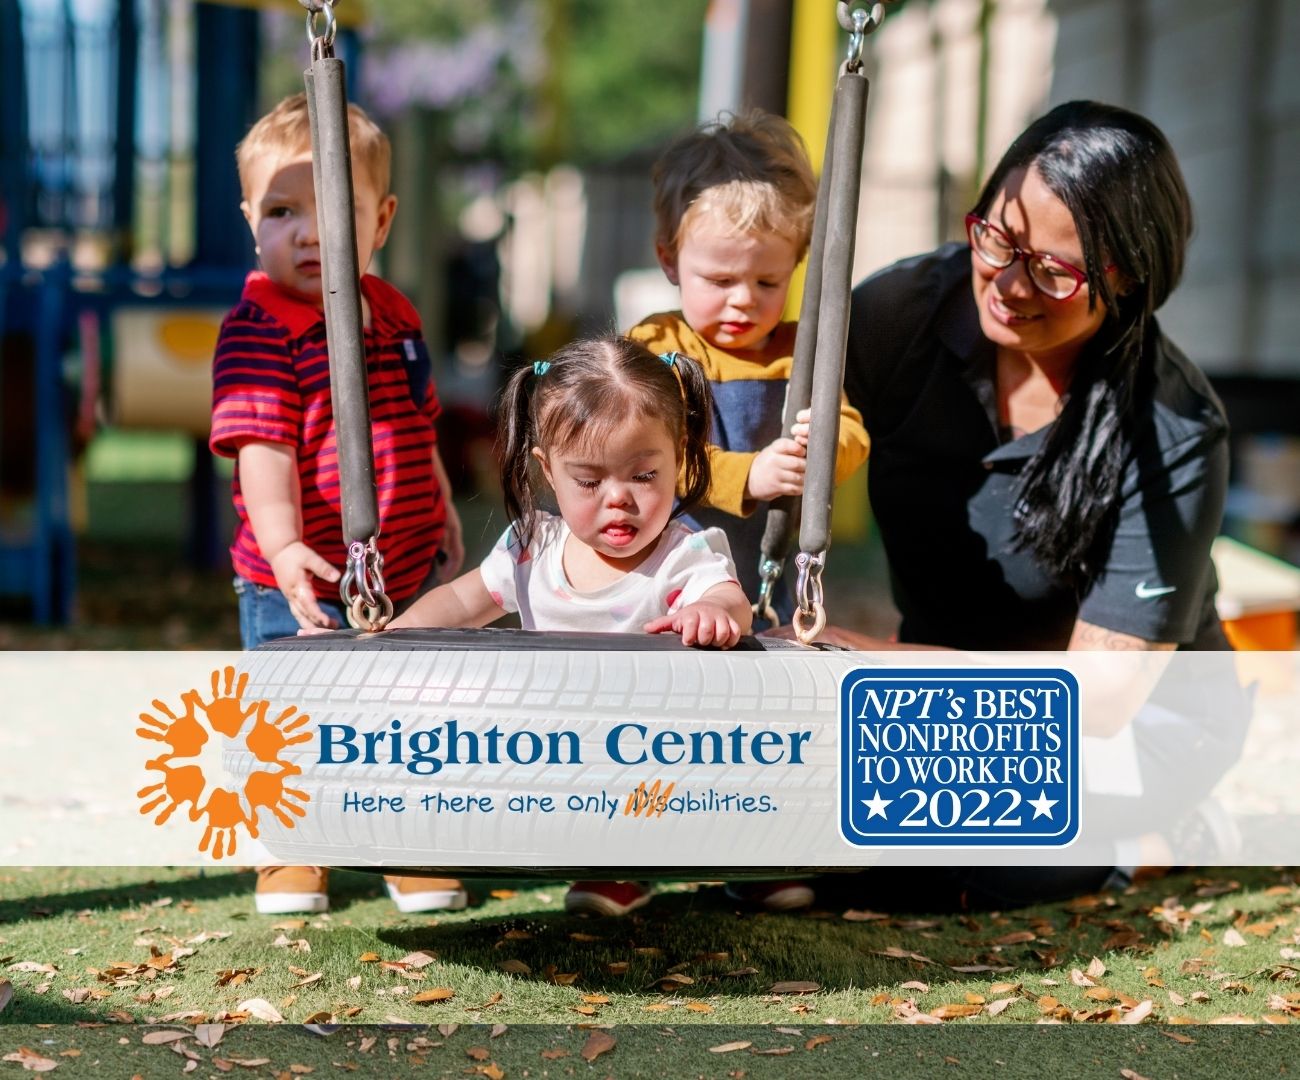 Brighton Center Nationally Recognized as one of the 2022 Best NonProfits to Work For